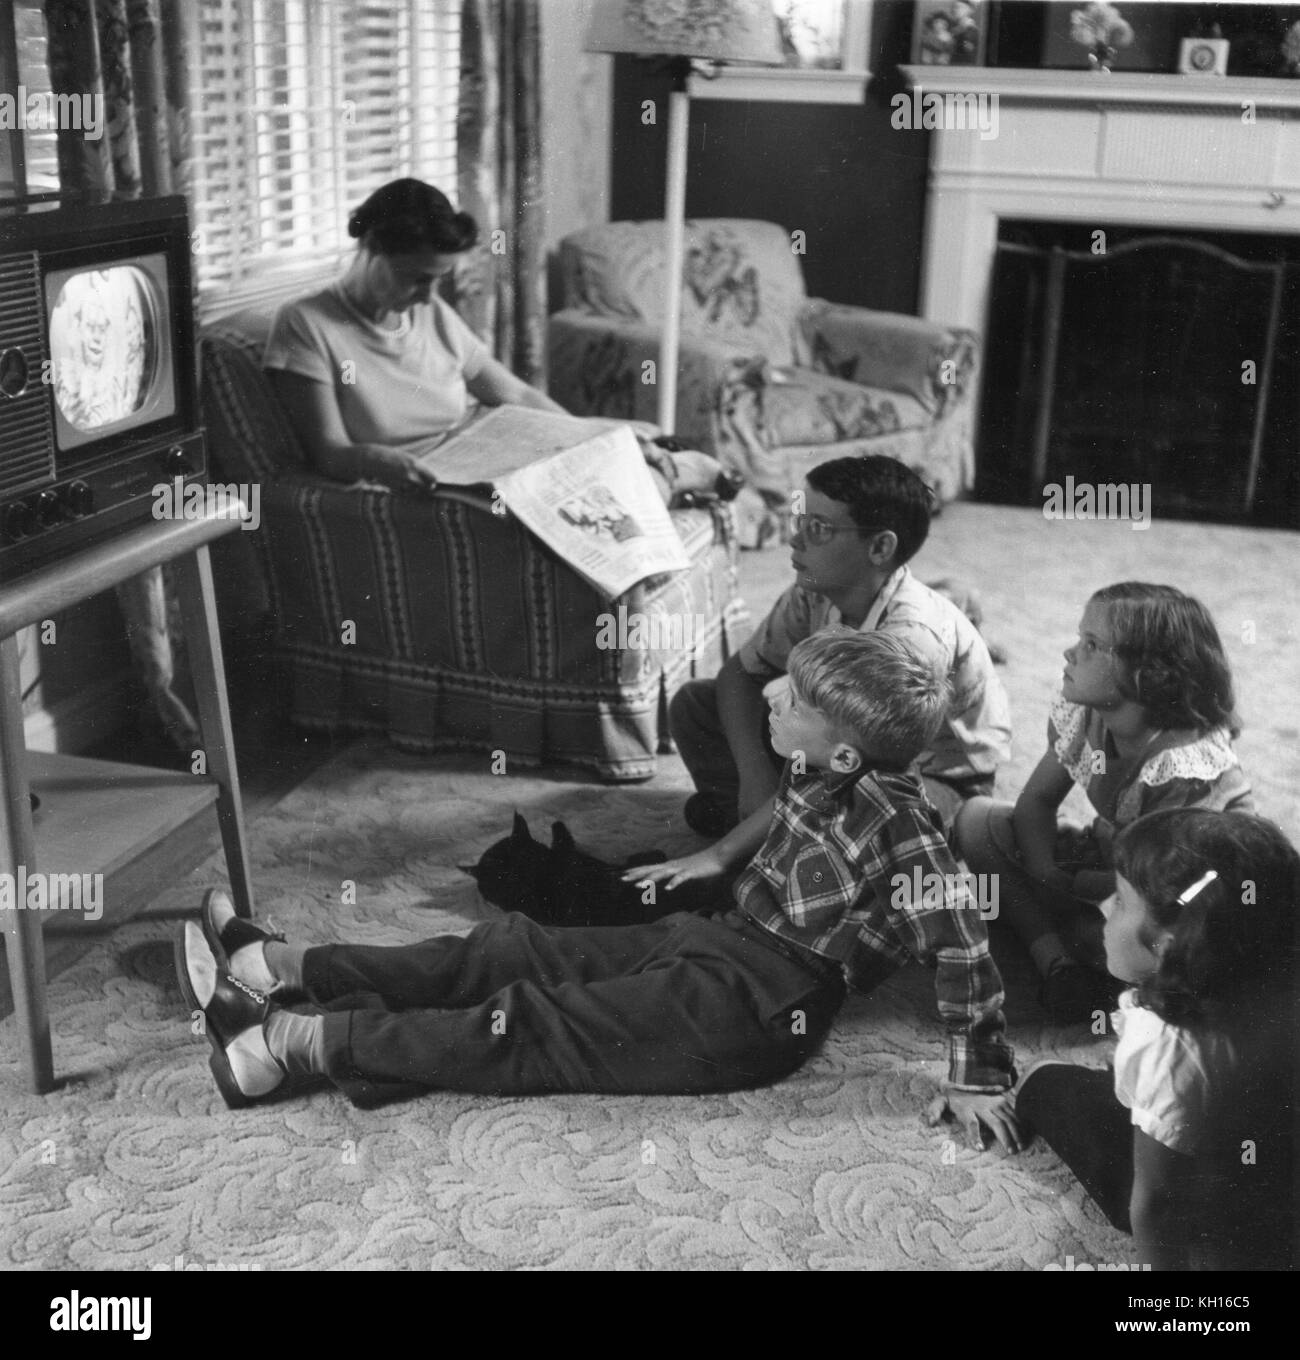 A family - mother, four children and pet - enjoy the television in their living room, Washington, DC, 1955. Stock Photo